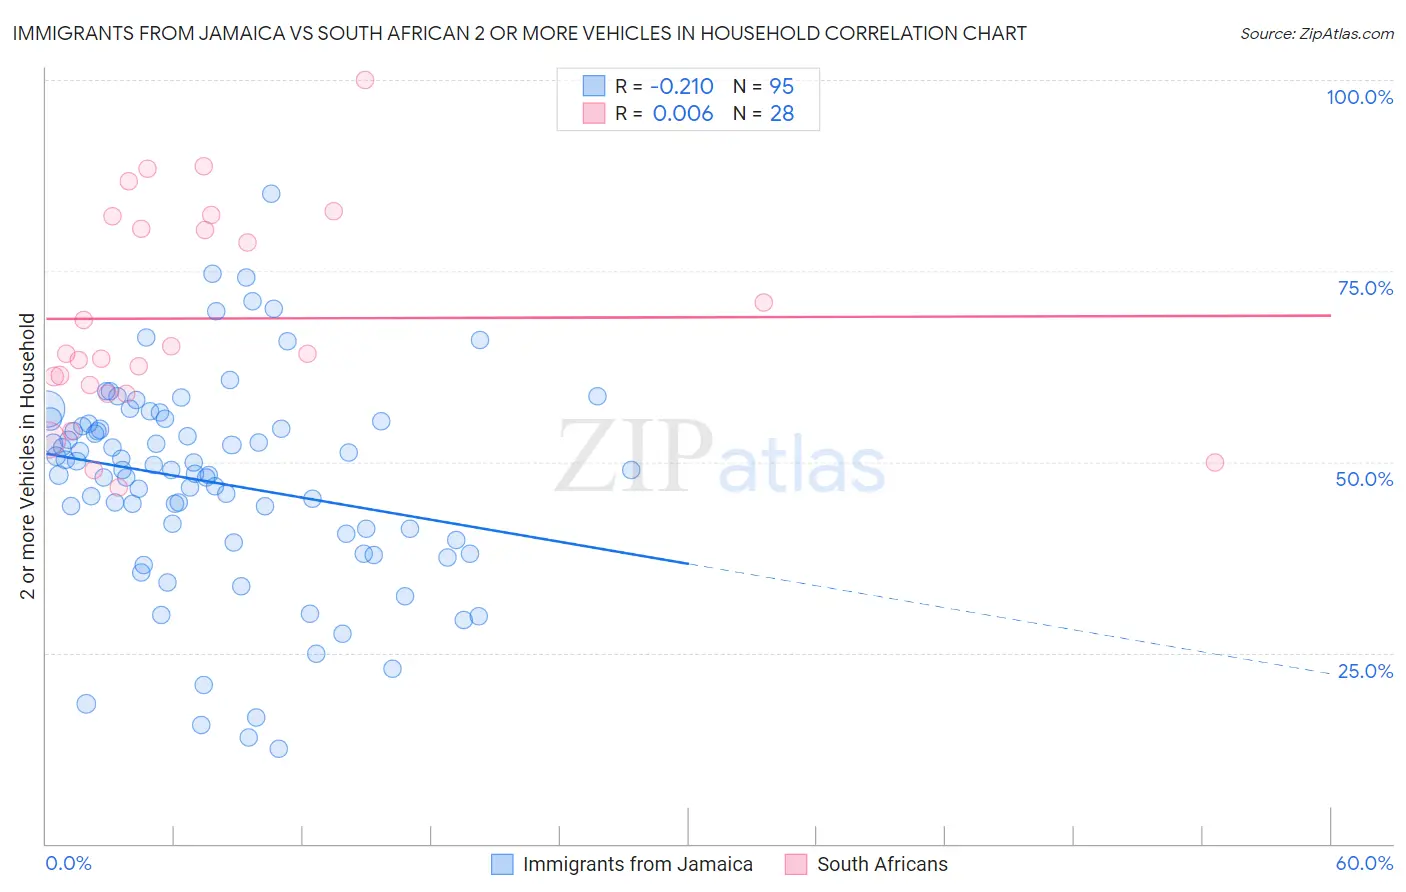 Immigrants from Jamaica vs South African 2 or more Vehicles in Household